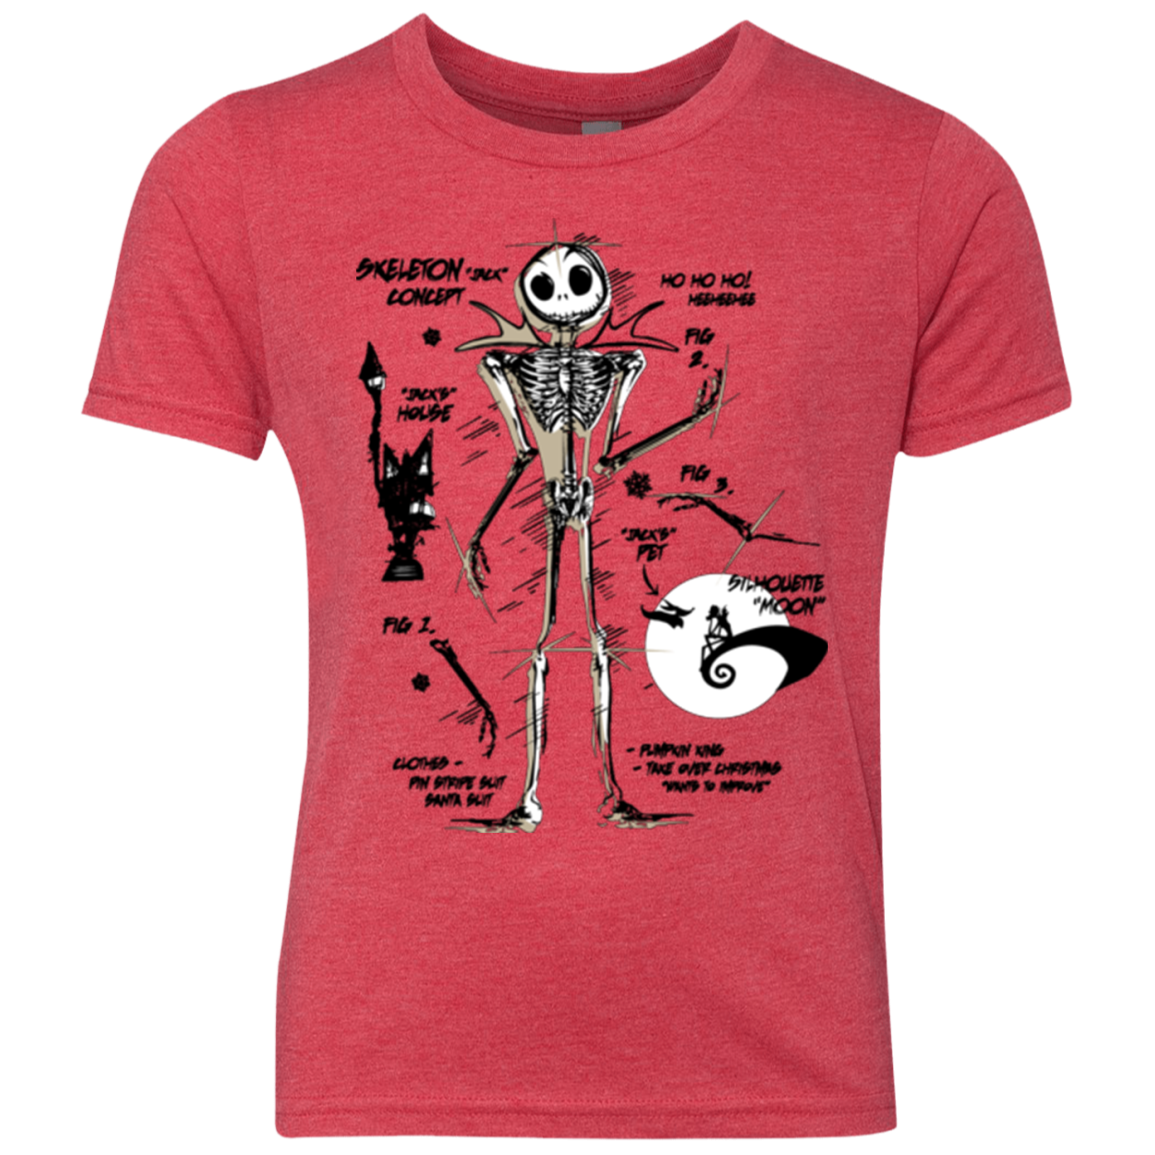 Skeleton Concept Youth Triblend T-Shirt